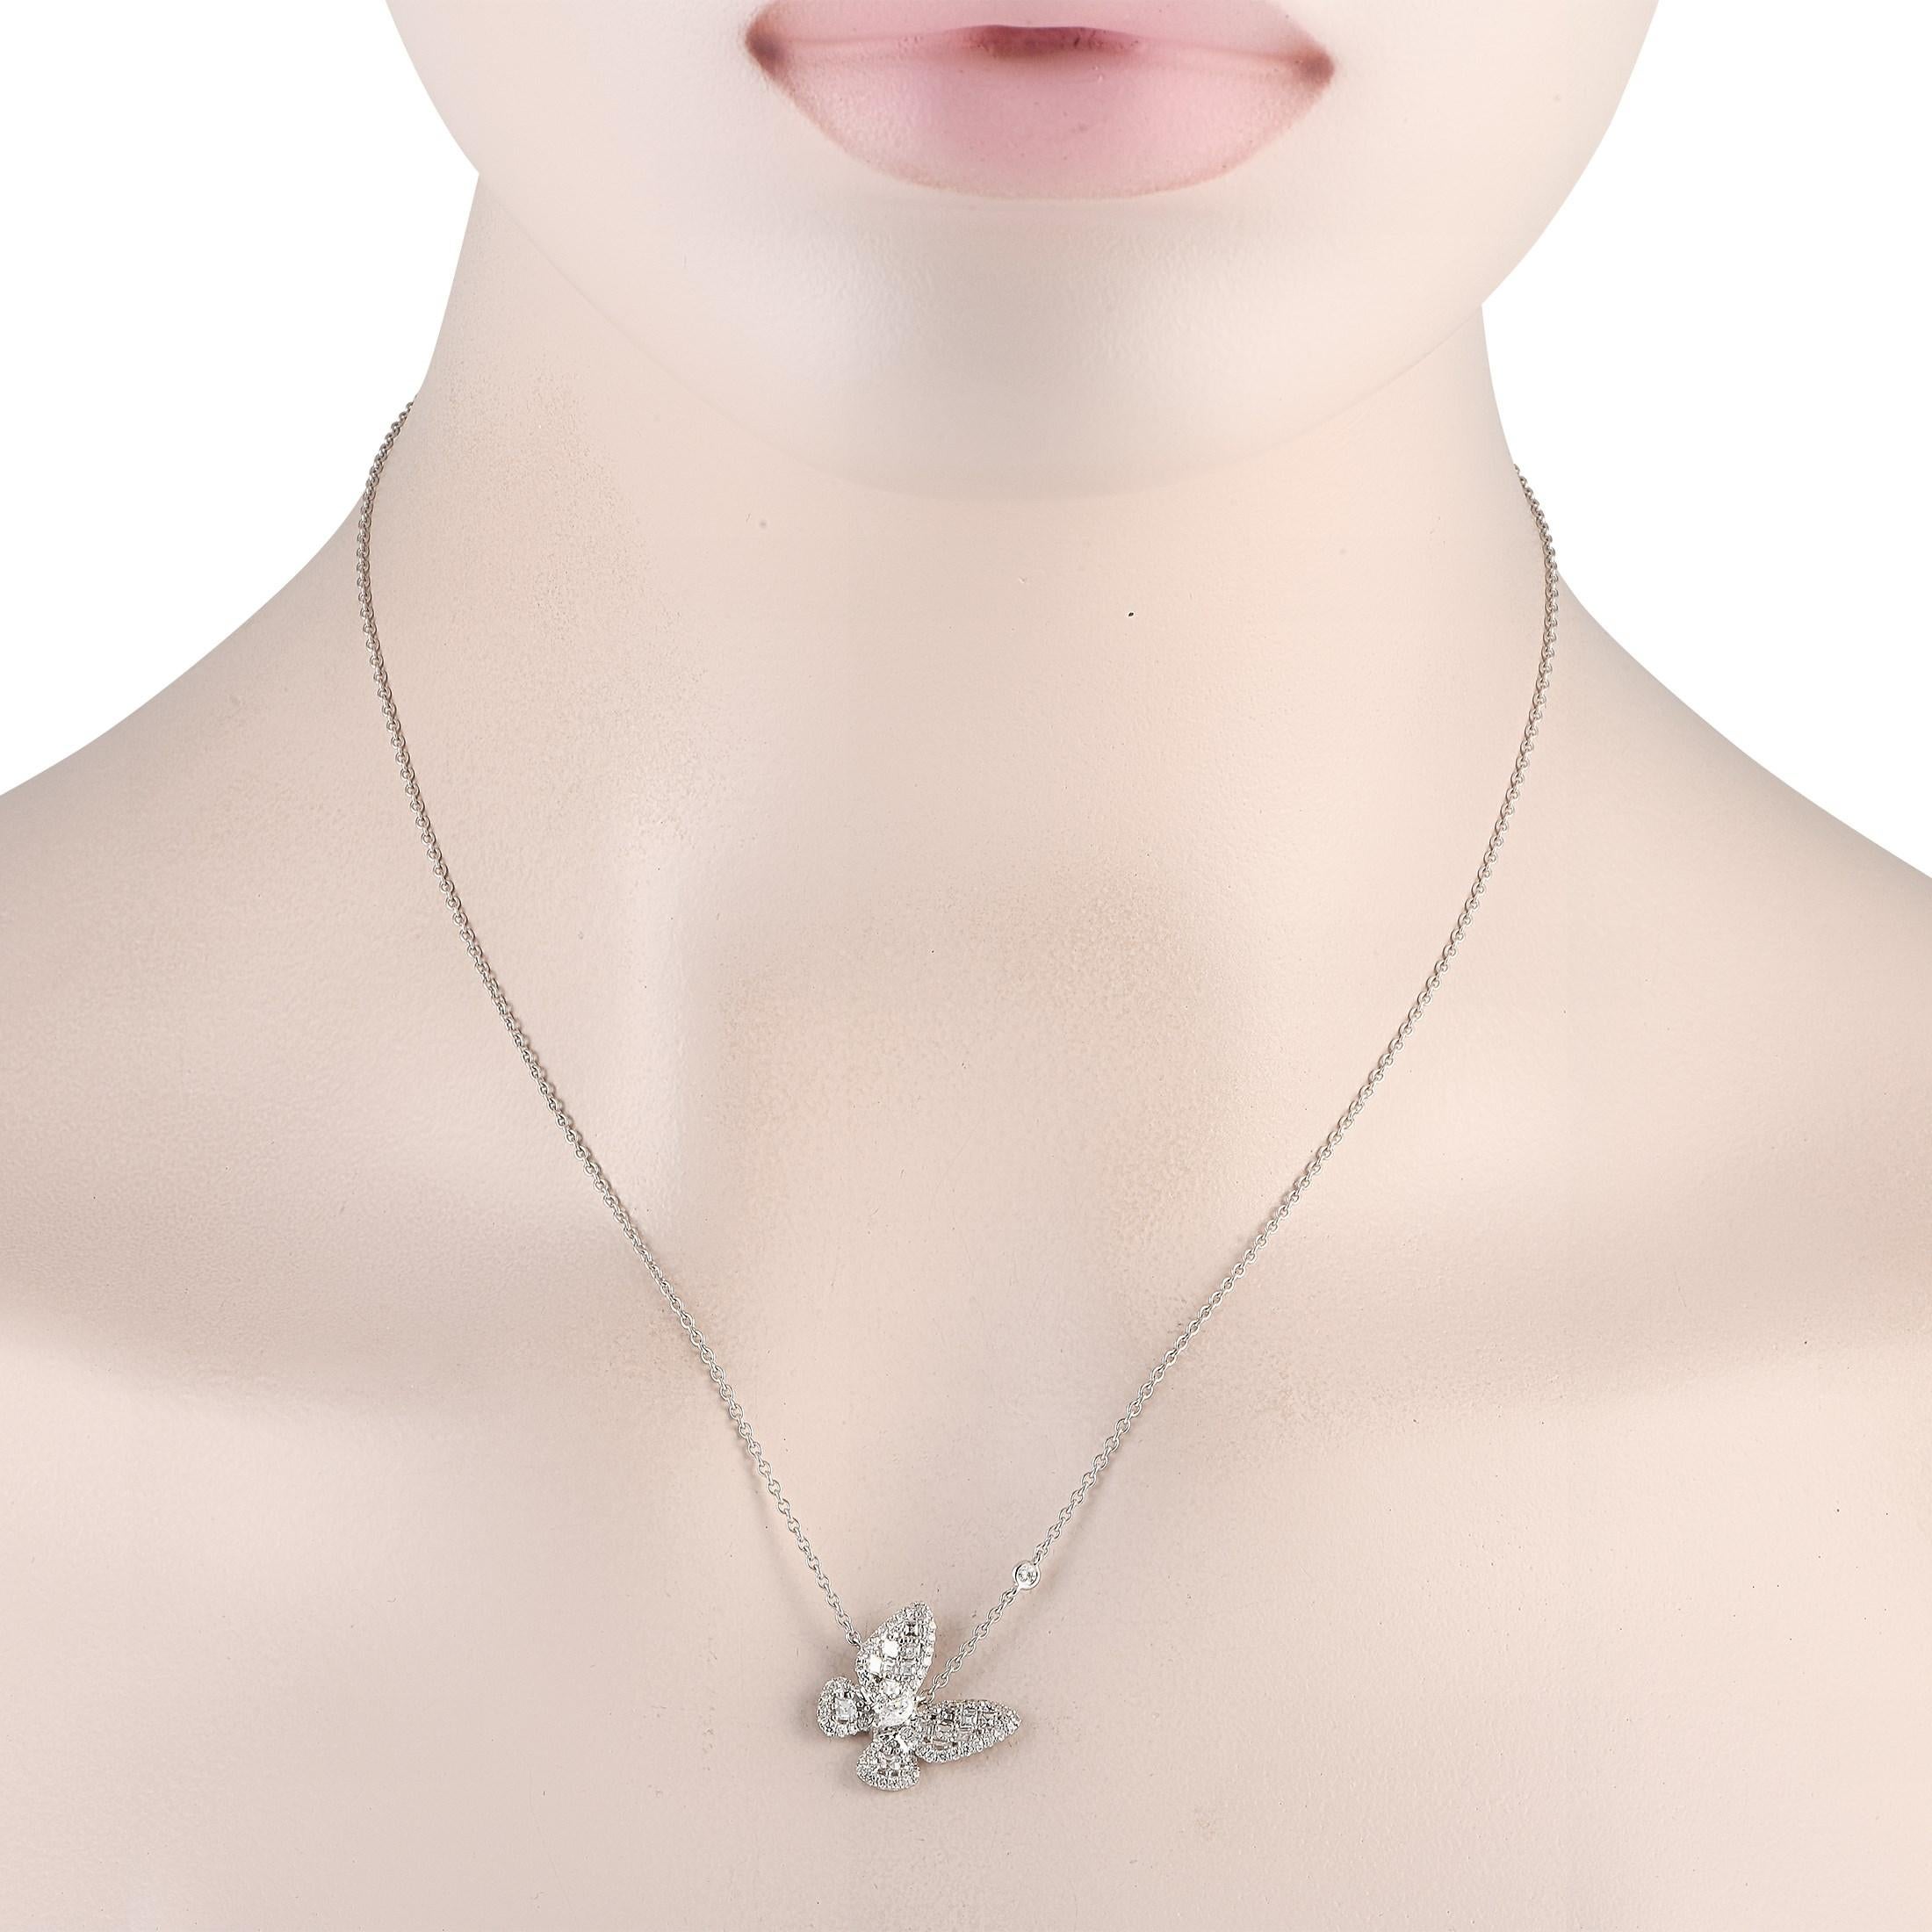 A playful bauble with a graceful shine, this diamond butterfly necklace is the perfect choice for days that require an extra dose of glitter. The necklace features an 18 chain in solid 18K white gold, holding a 0.75-wide pendant in the shape of a